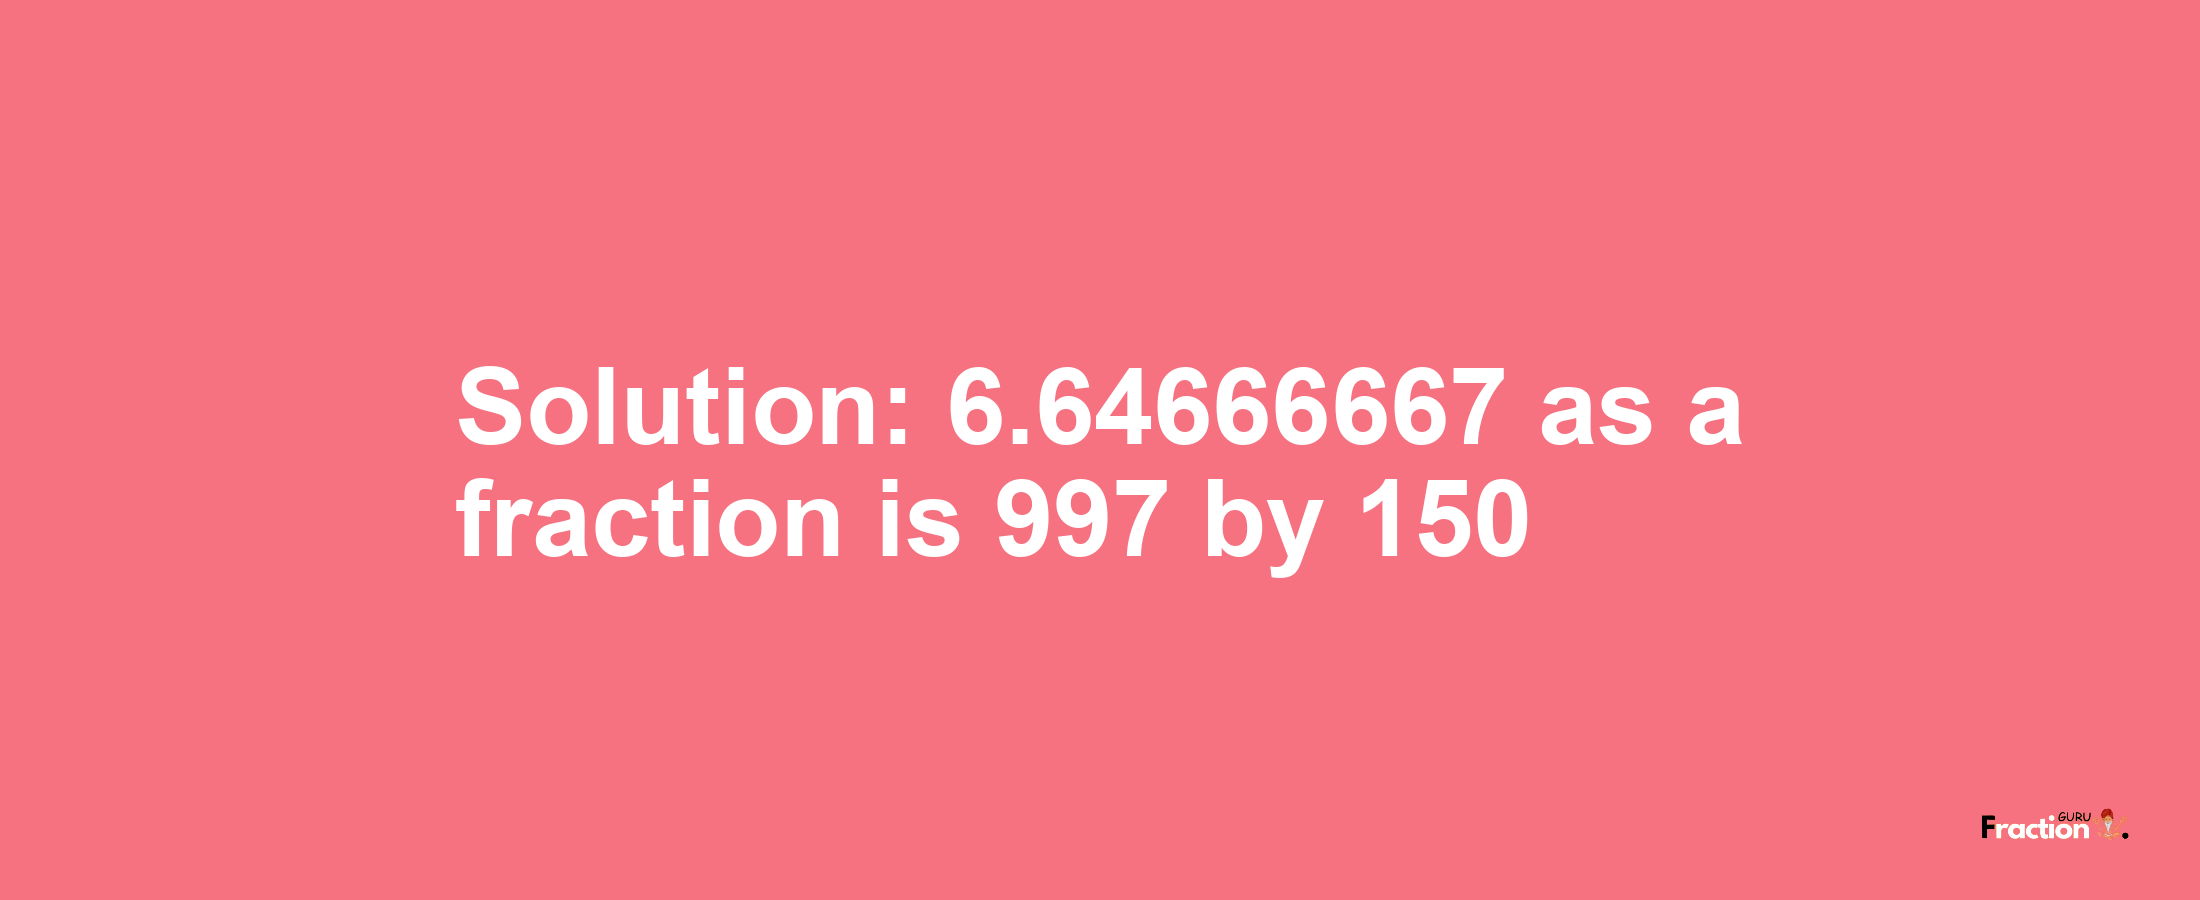 Solution:6.64666667 as a fraction is 997/150